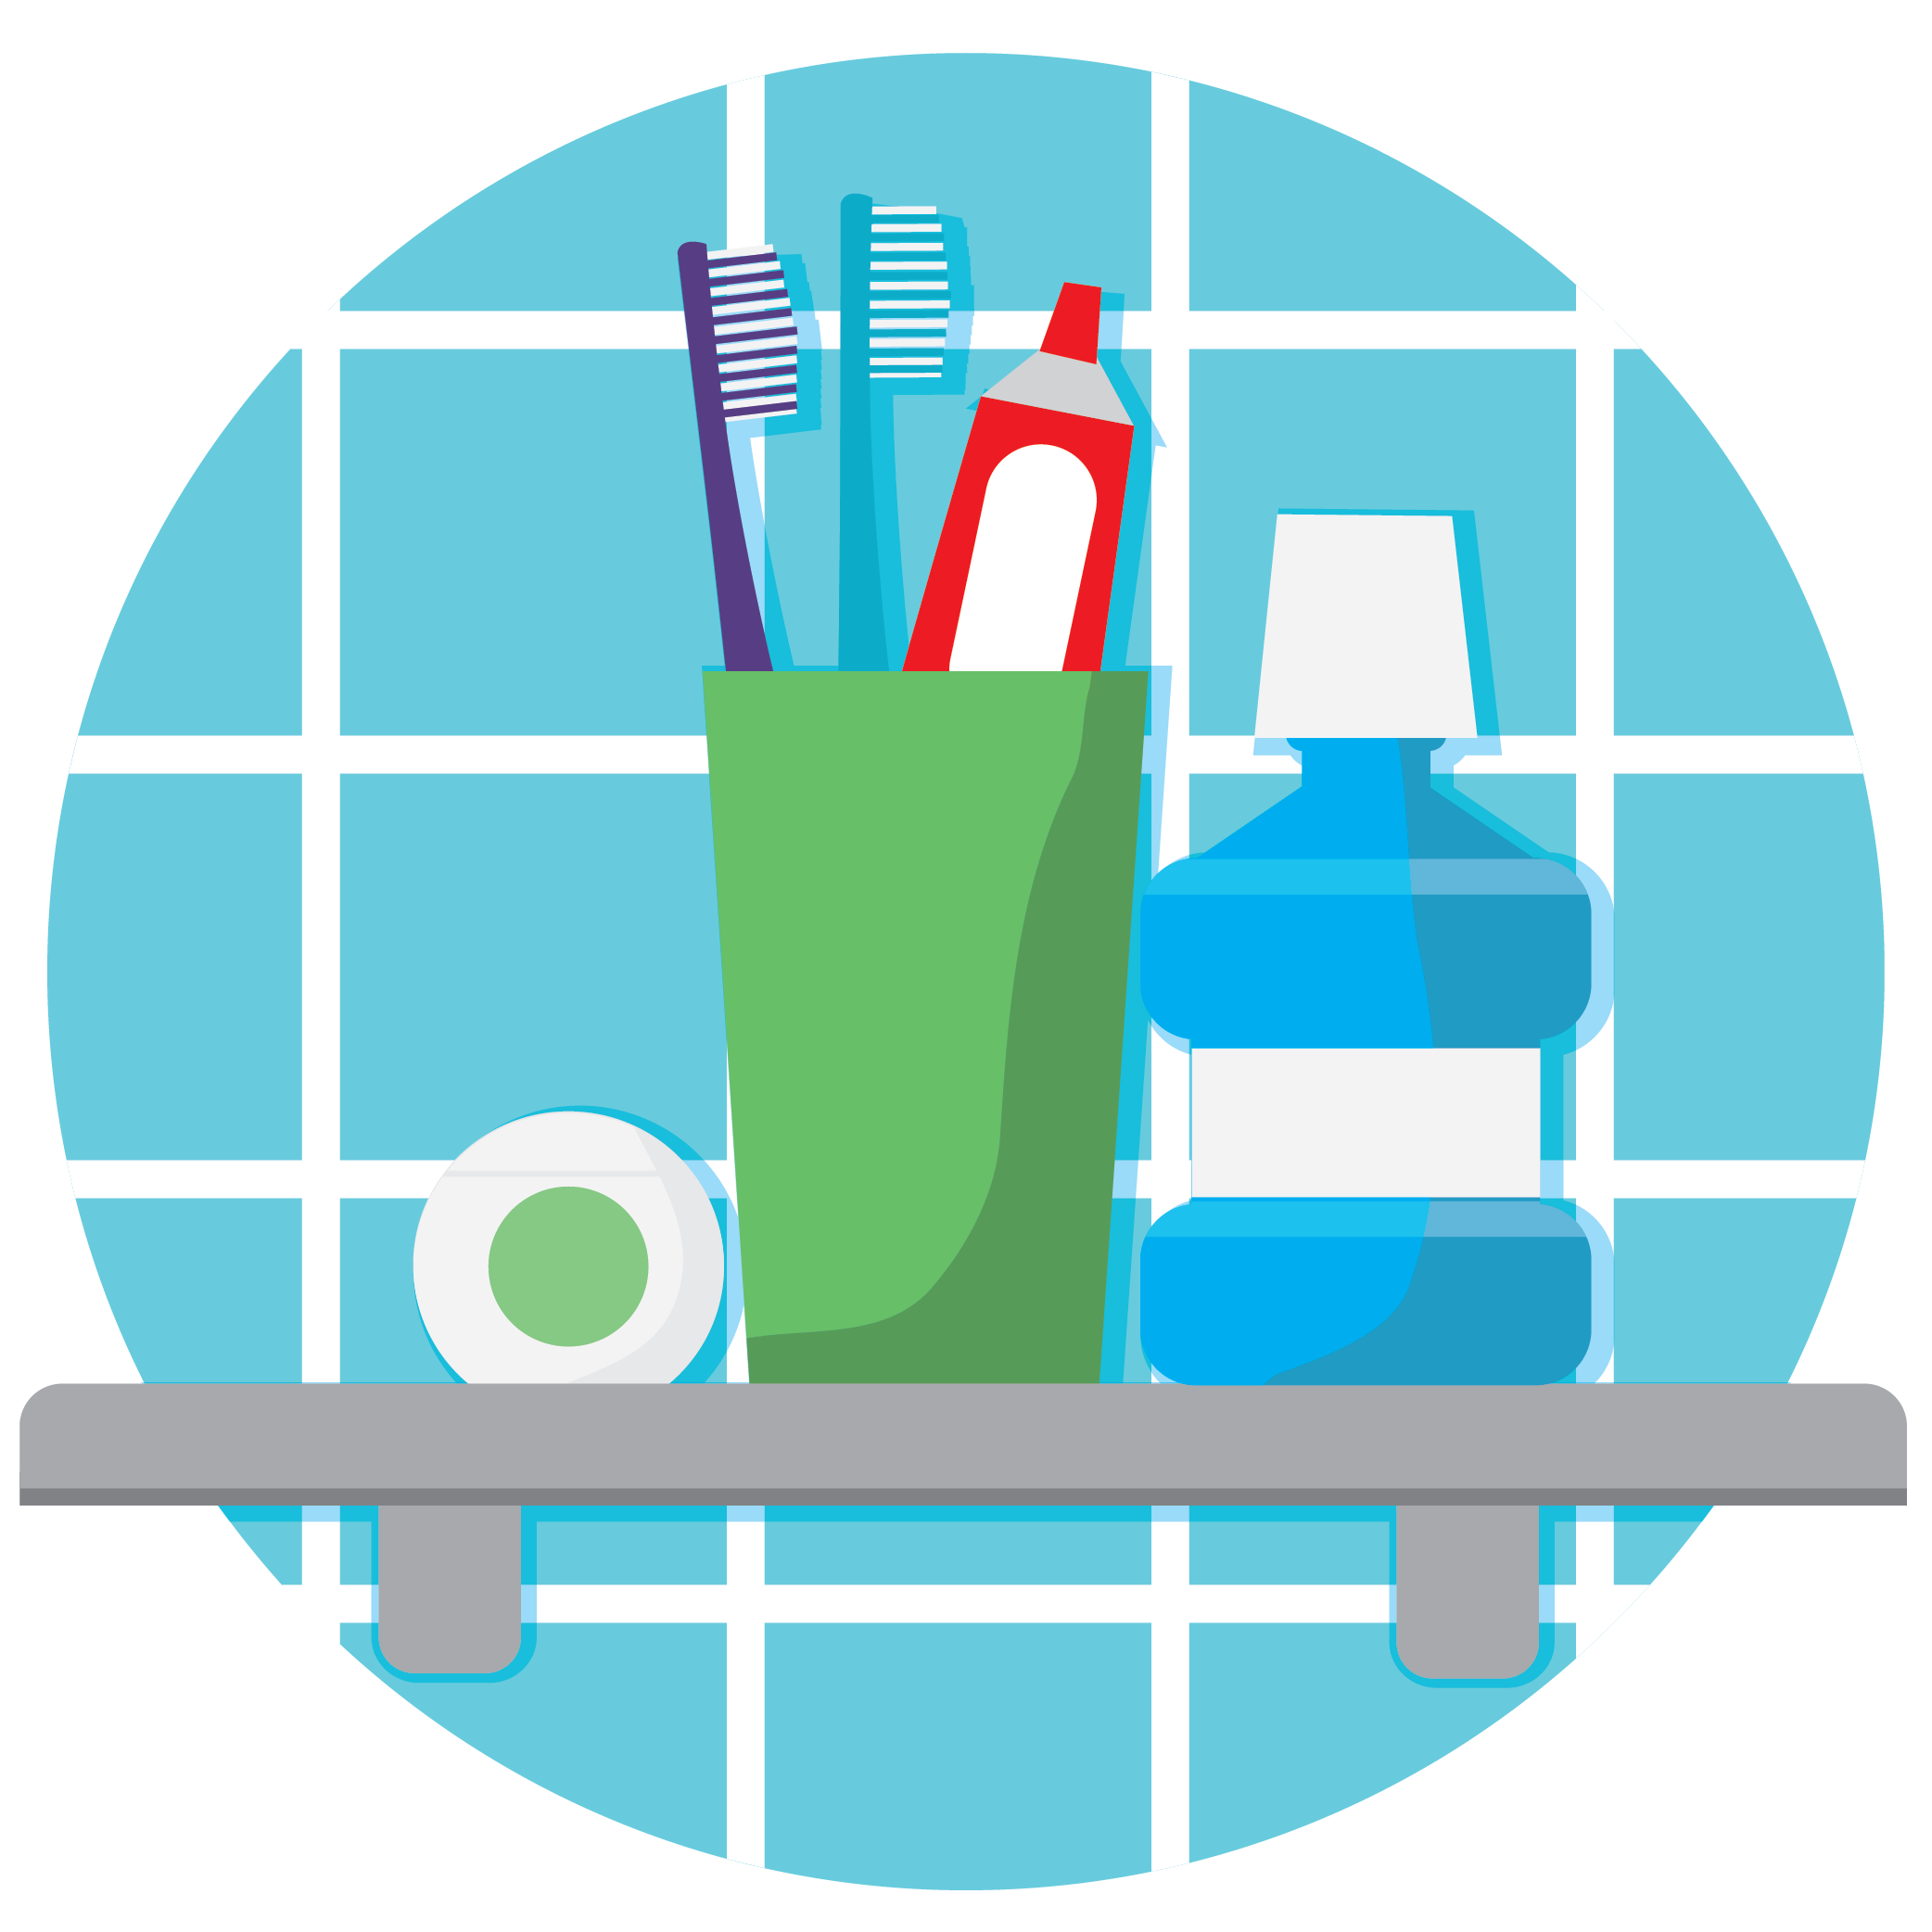 Illustration of a cup on a bathroom shelf. Inside the cup are a purple toothbrush, a blue toothbrush and a tube of toothpaste that are visible sticking out of the top of the green cup. Next to these items on the shelf is a bottle of mouthwash 